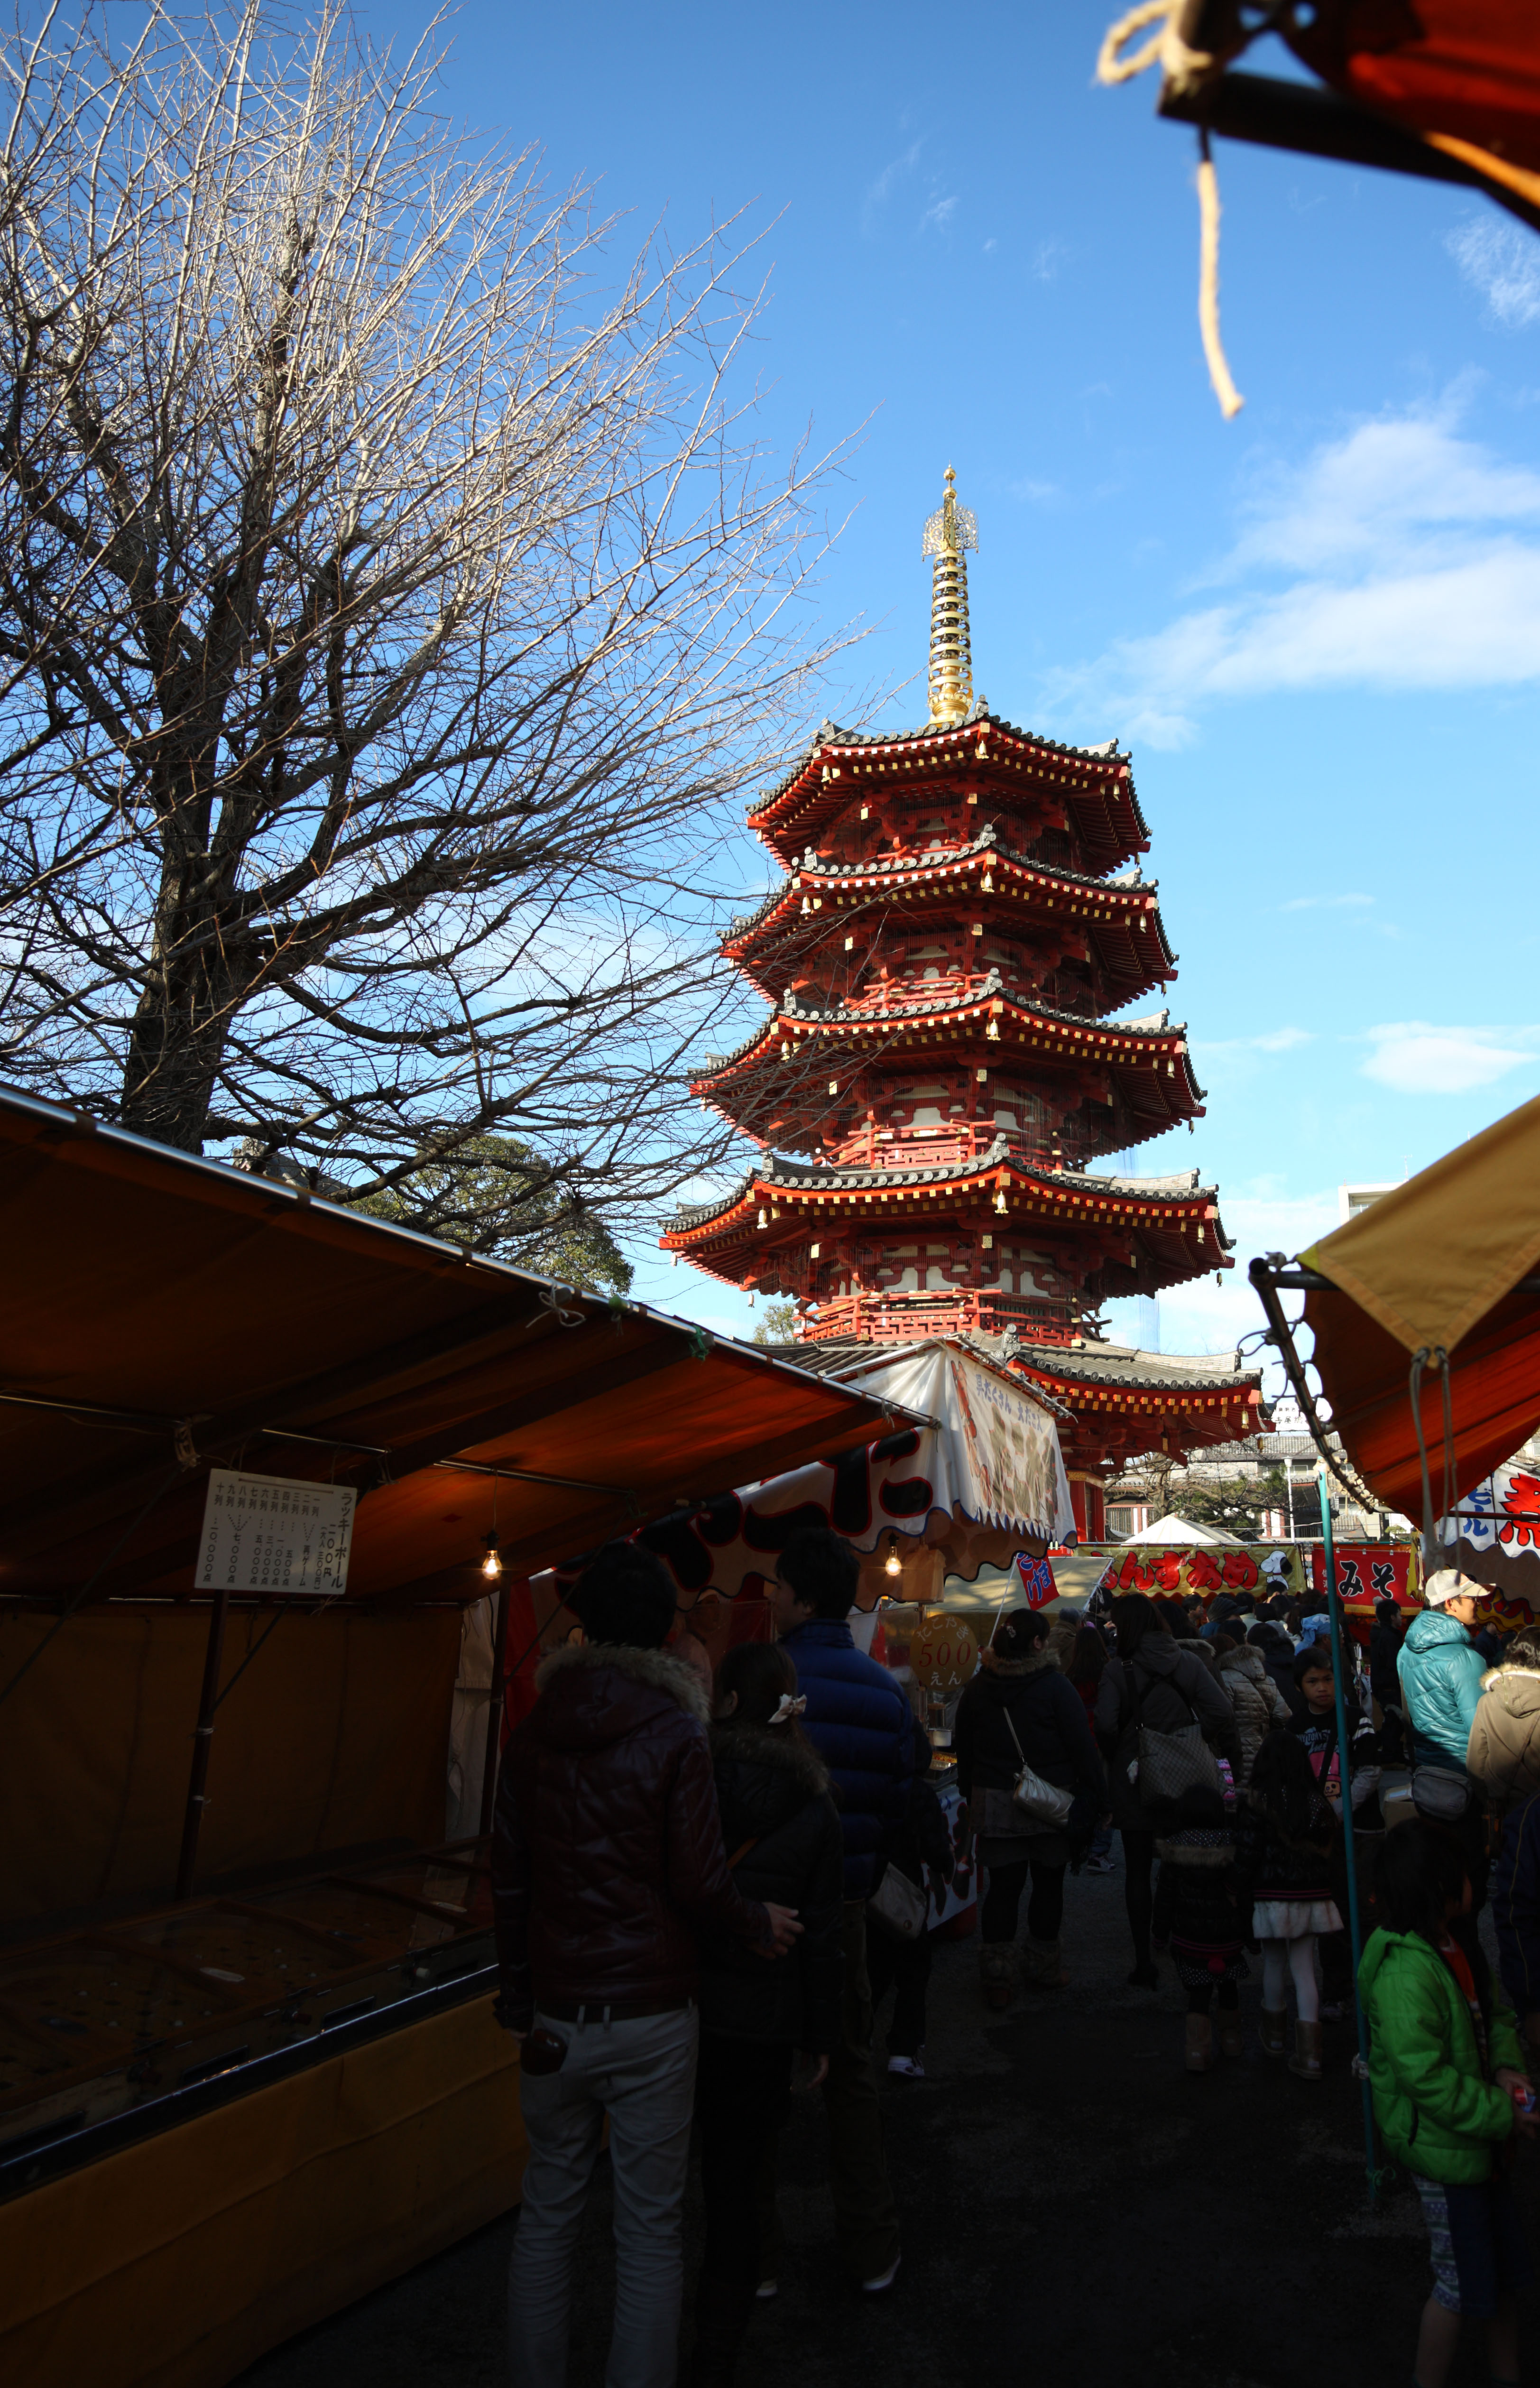 photo,material,free,landscape,picture,stock photo,Creative Commons,Kawasakidaishi, New Year's visit to a Shinto shrine, worshiper, branch, Octagonal Five Storeyed Pagoda